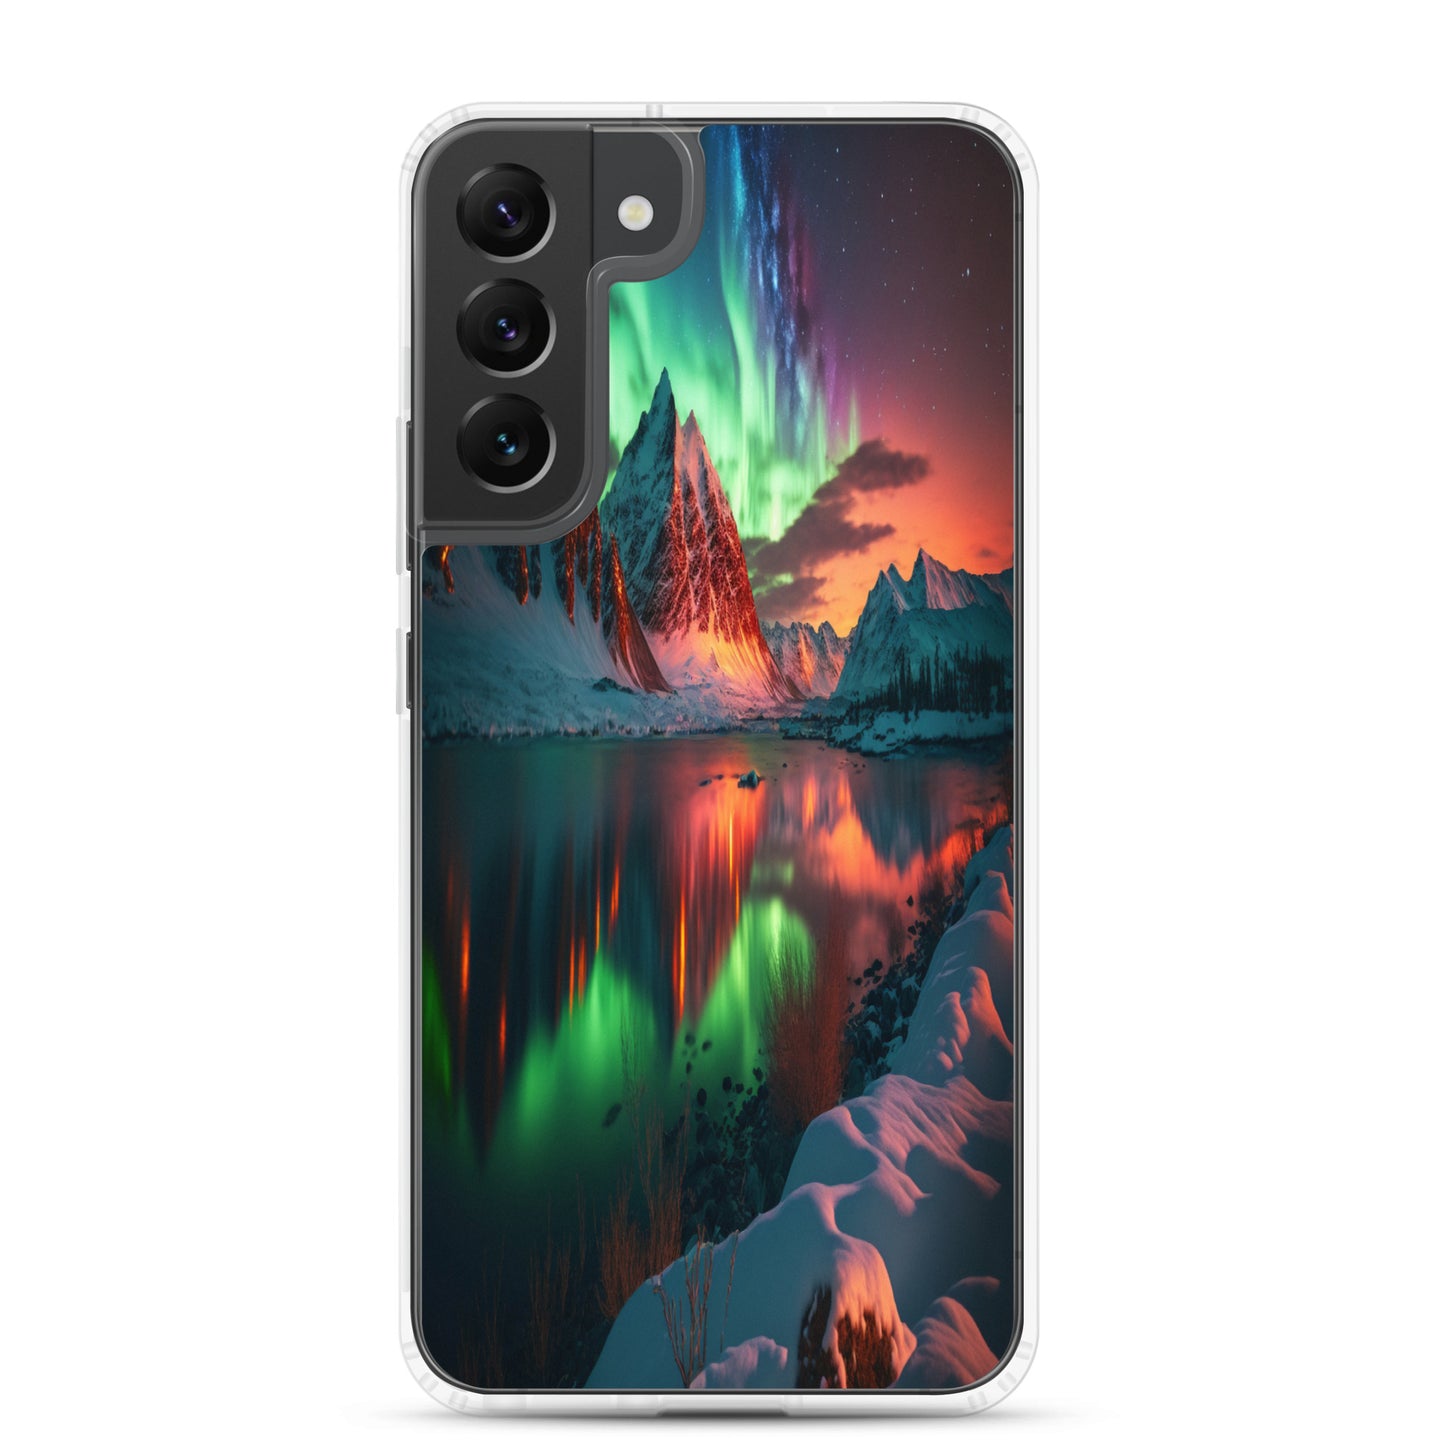 Unique Aurora Borealis Samsung Cover Case - Northern Light Phone Cover Case - Clear Case for Samsung Galaxy - Perfect Aurora Lovers Gift 8